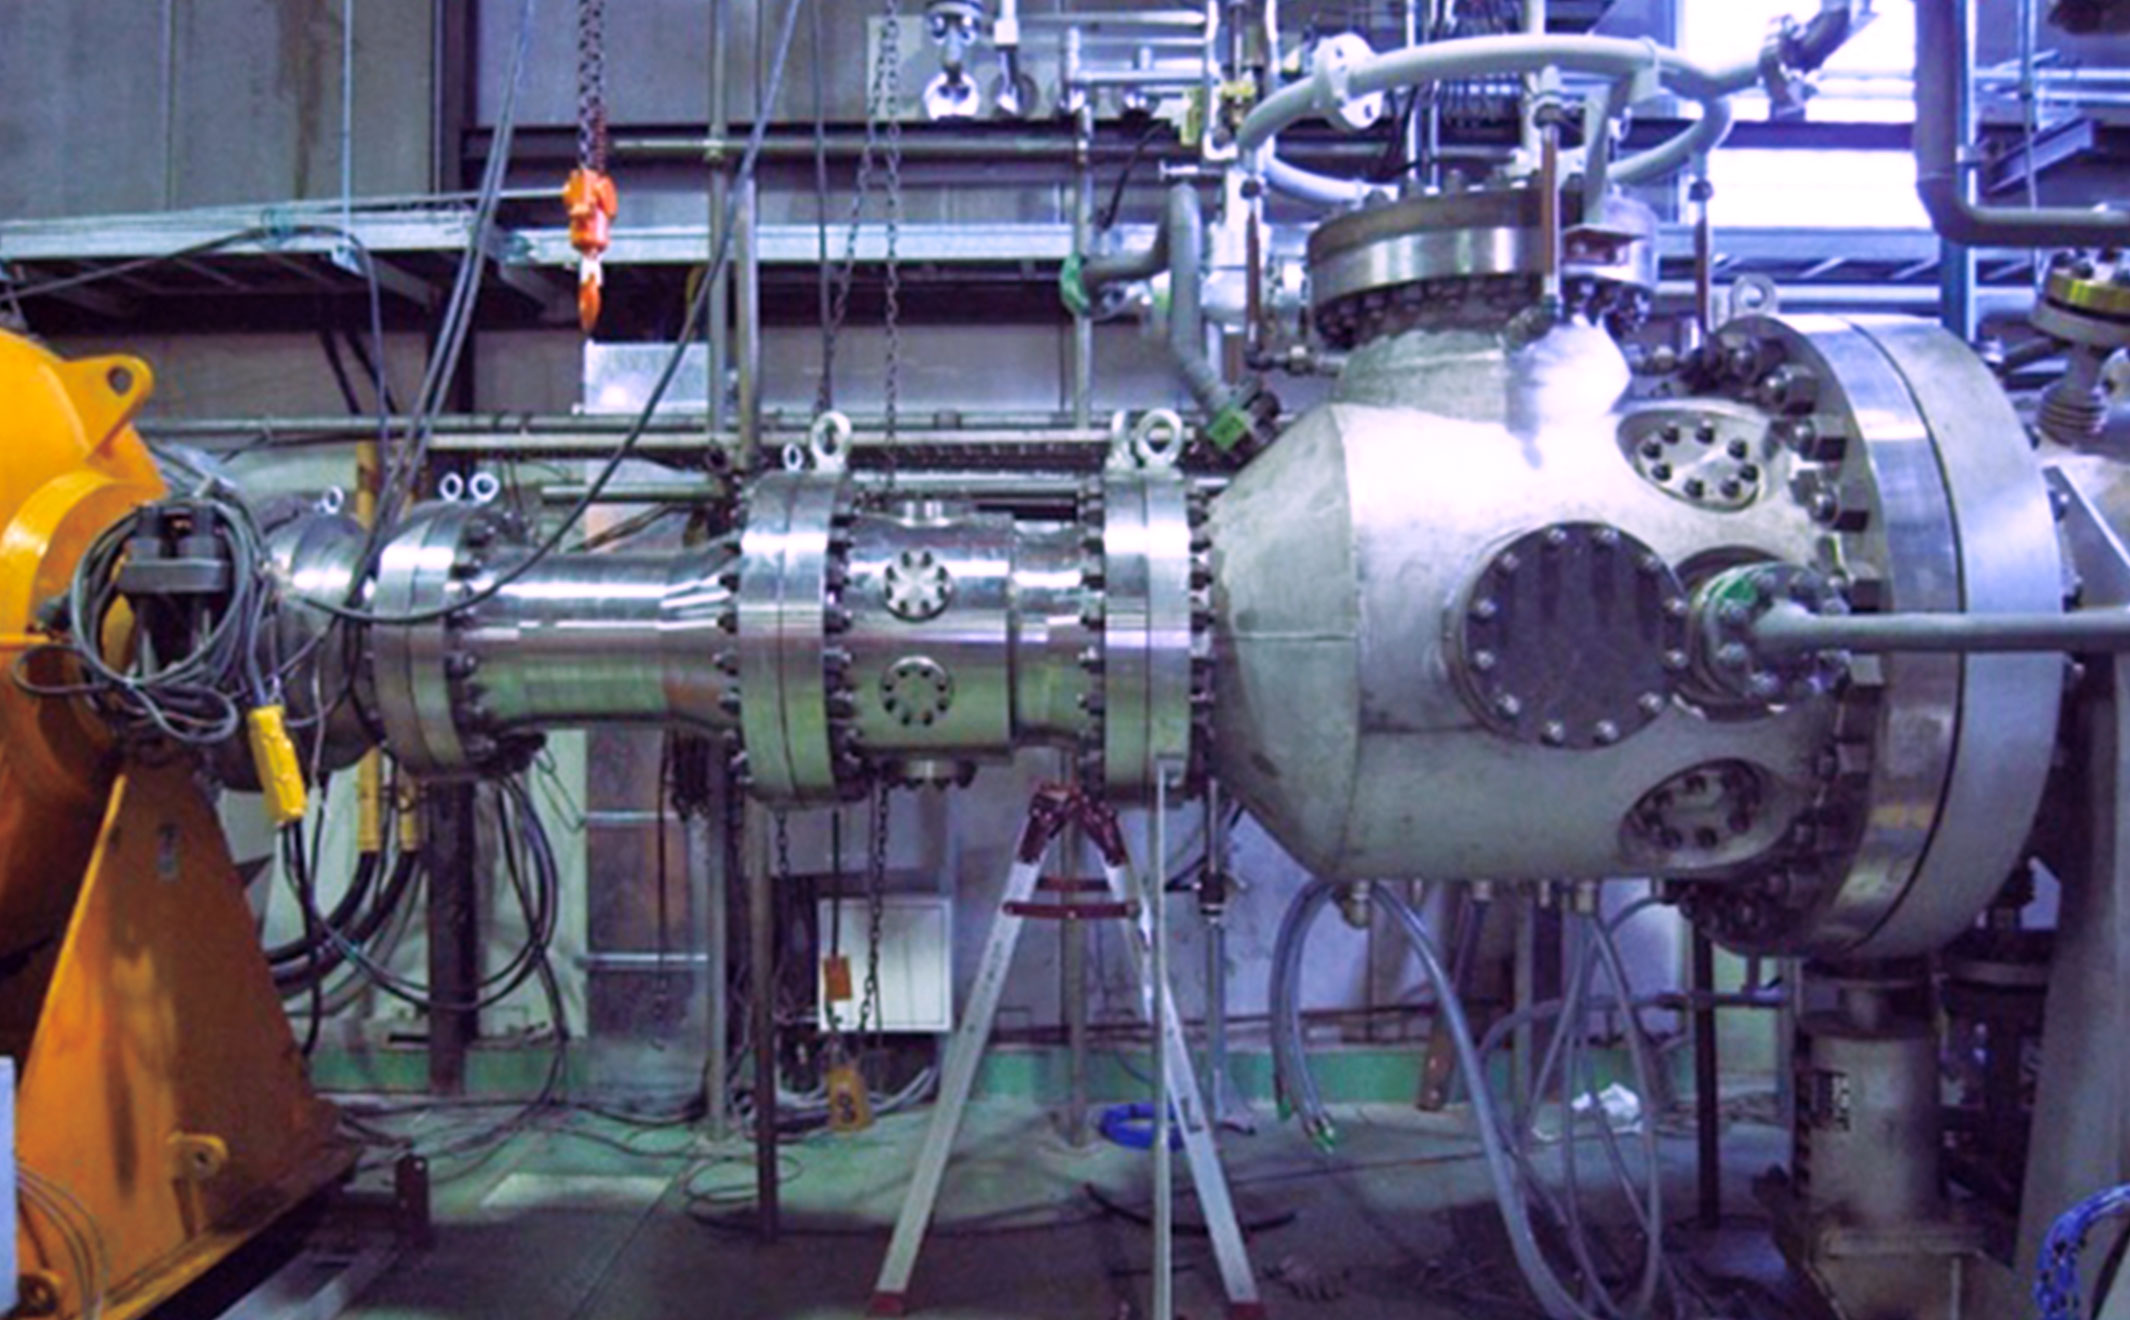 Aeroengine structures and materials test facilities